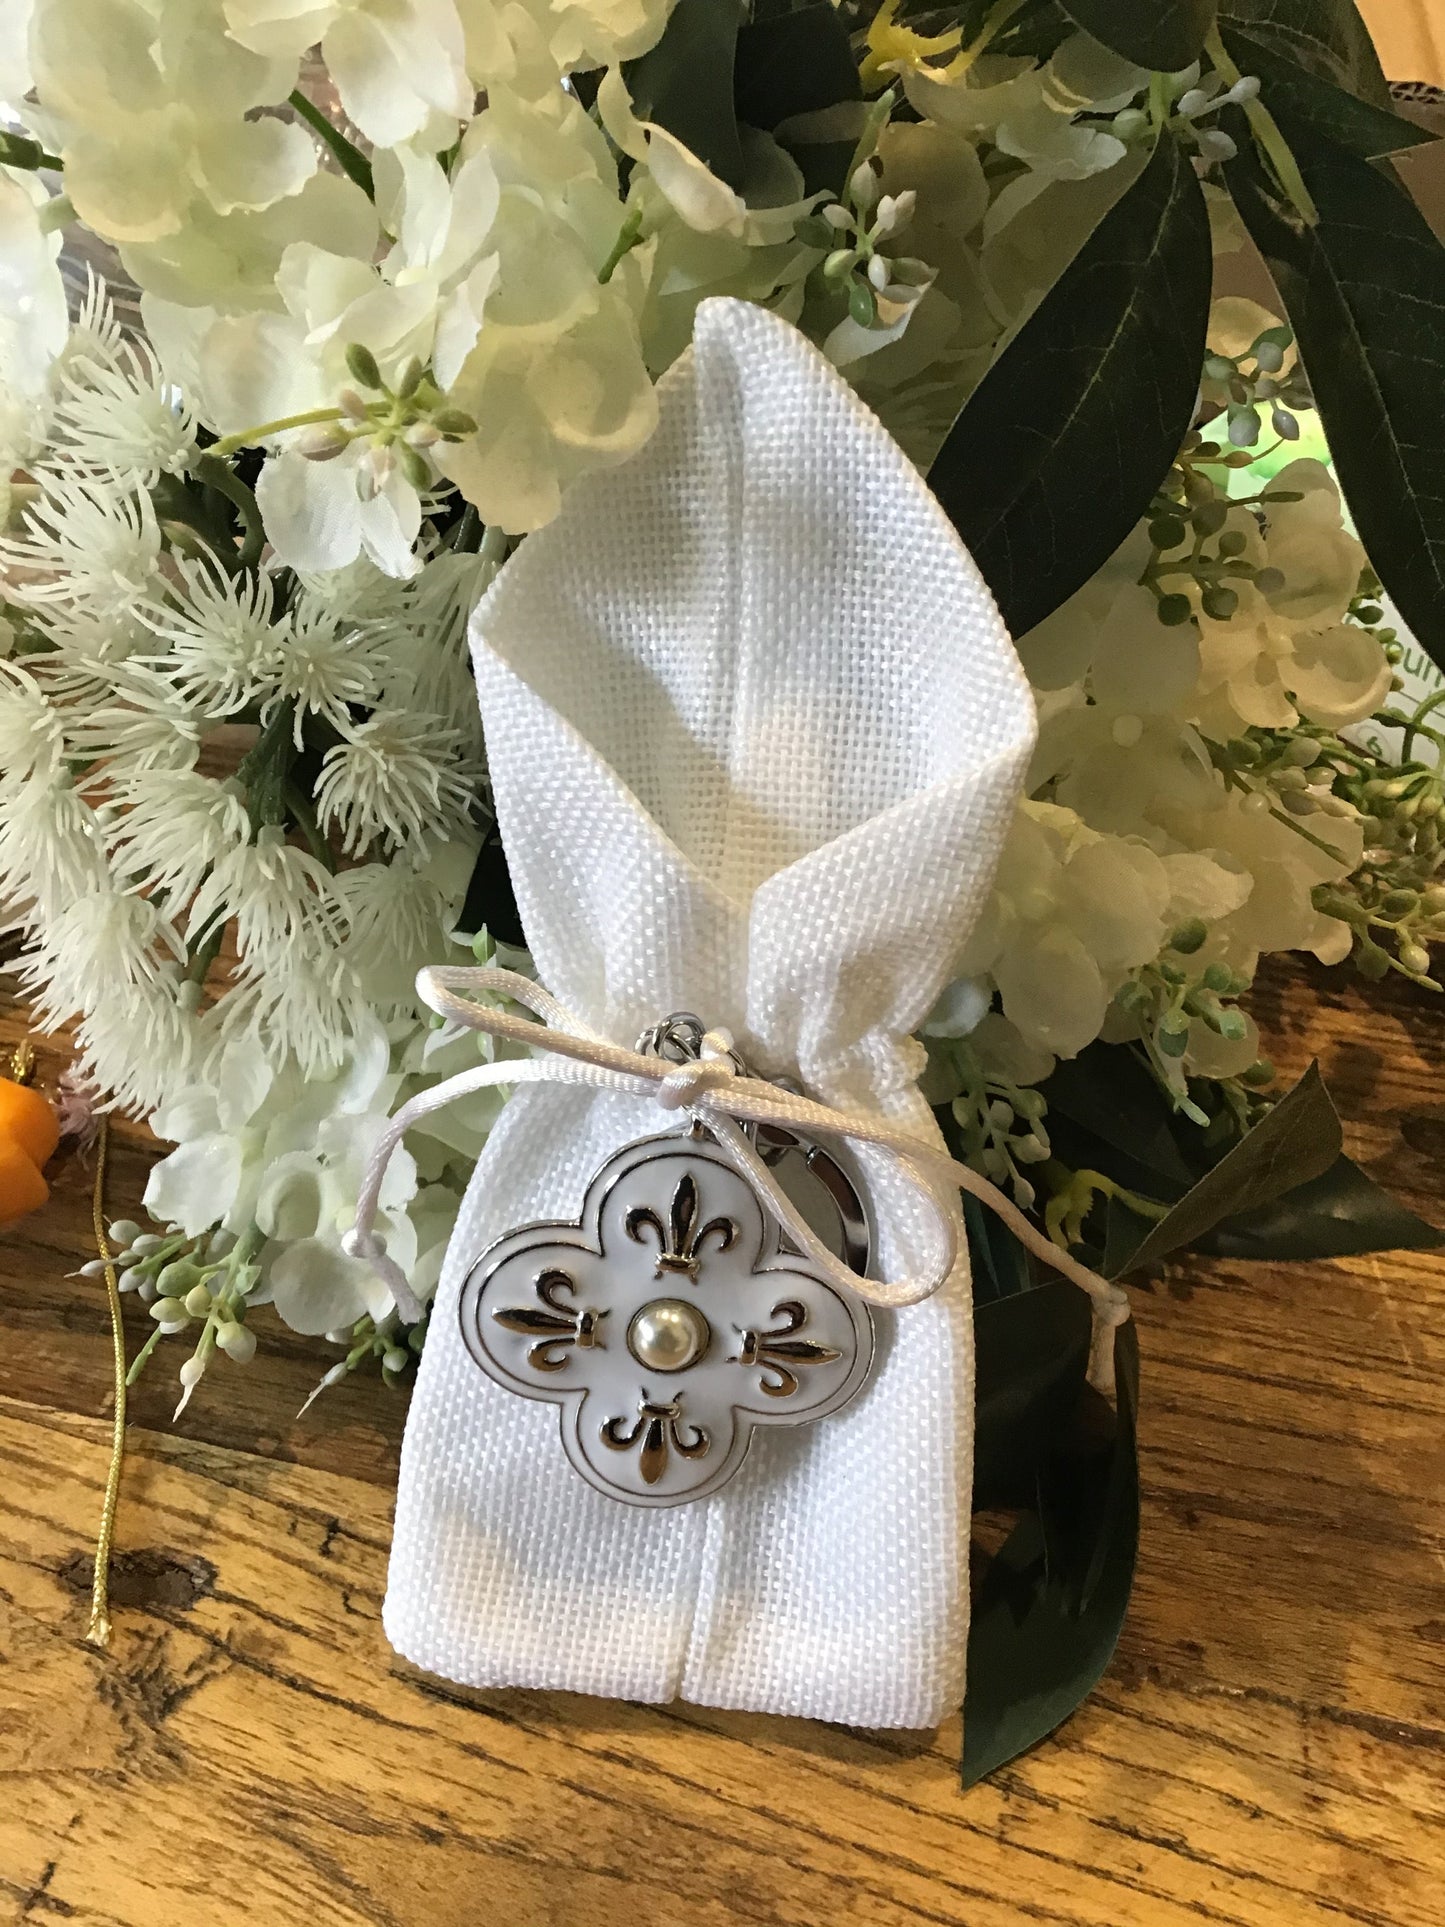 Bomboniere - White Cross with Pearl Centre Keyring on White Jute Pouch - 0